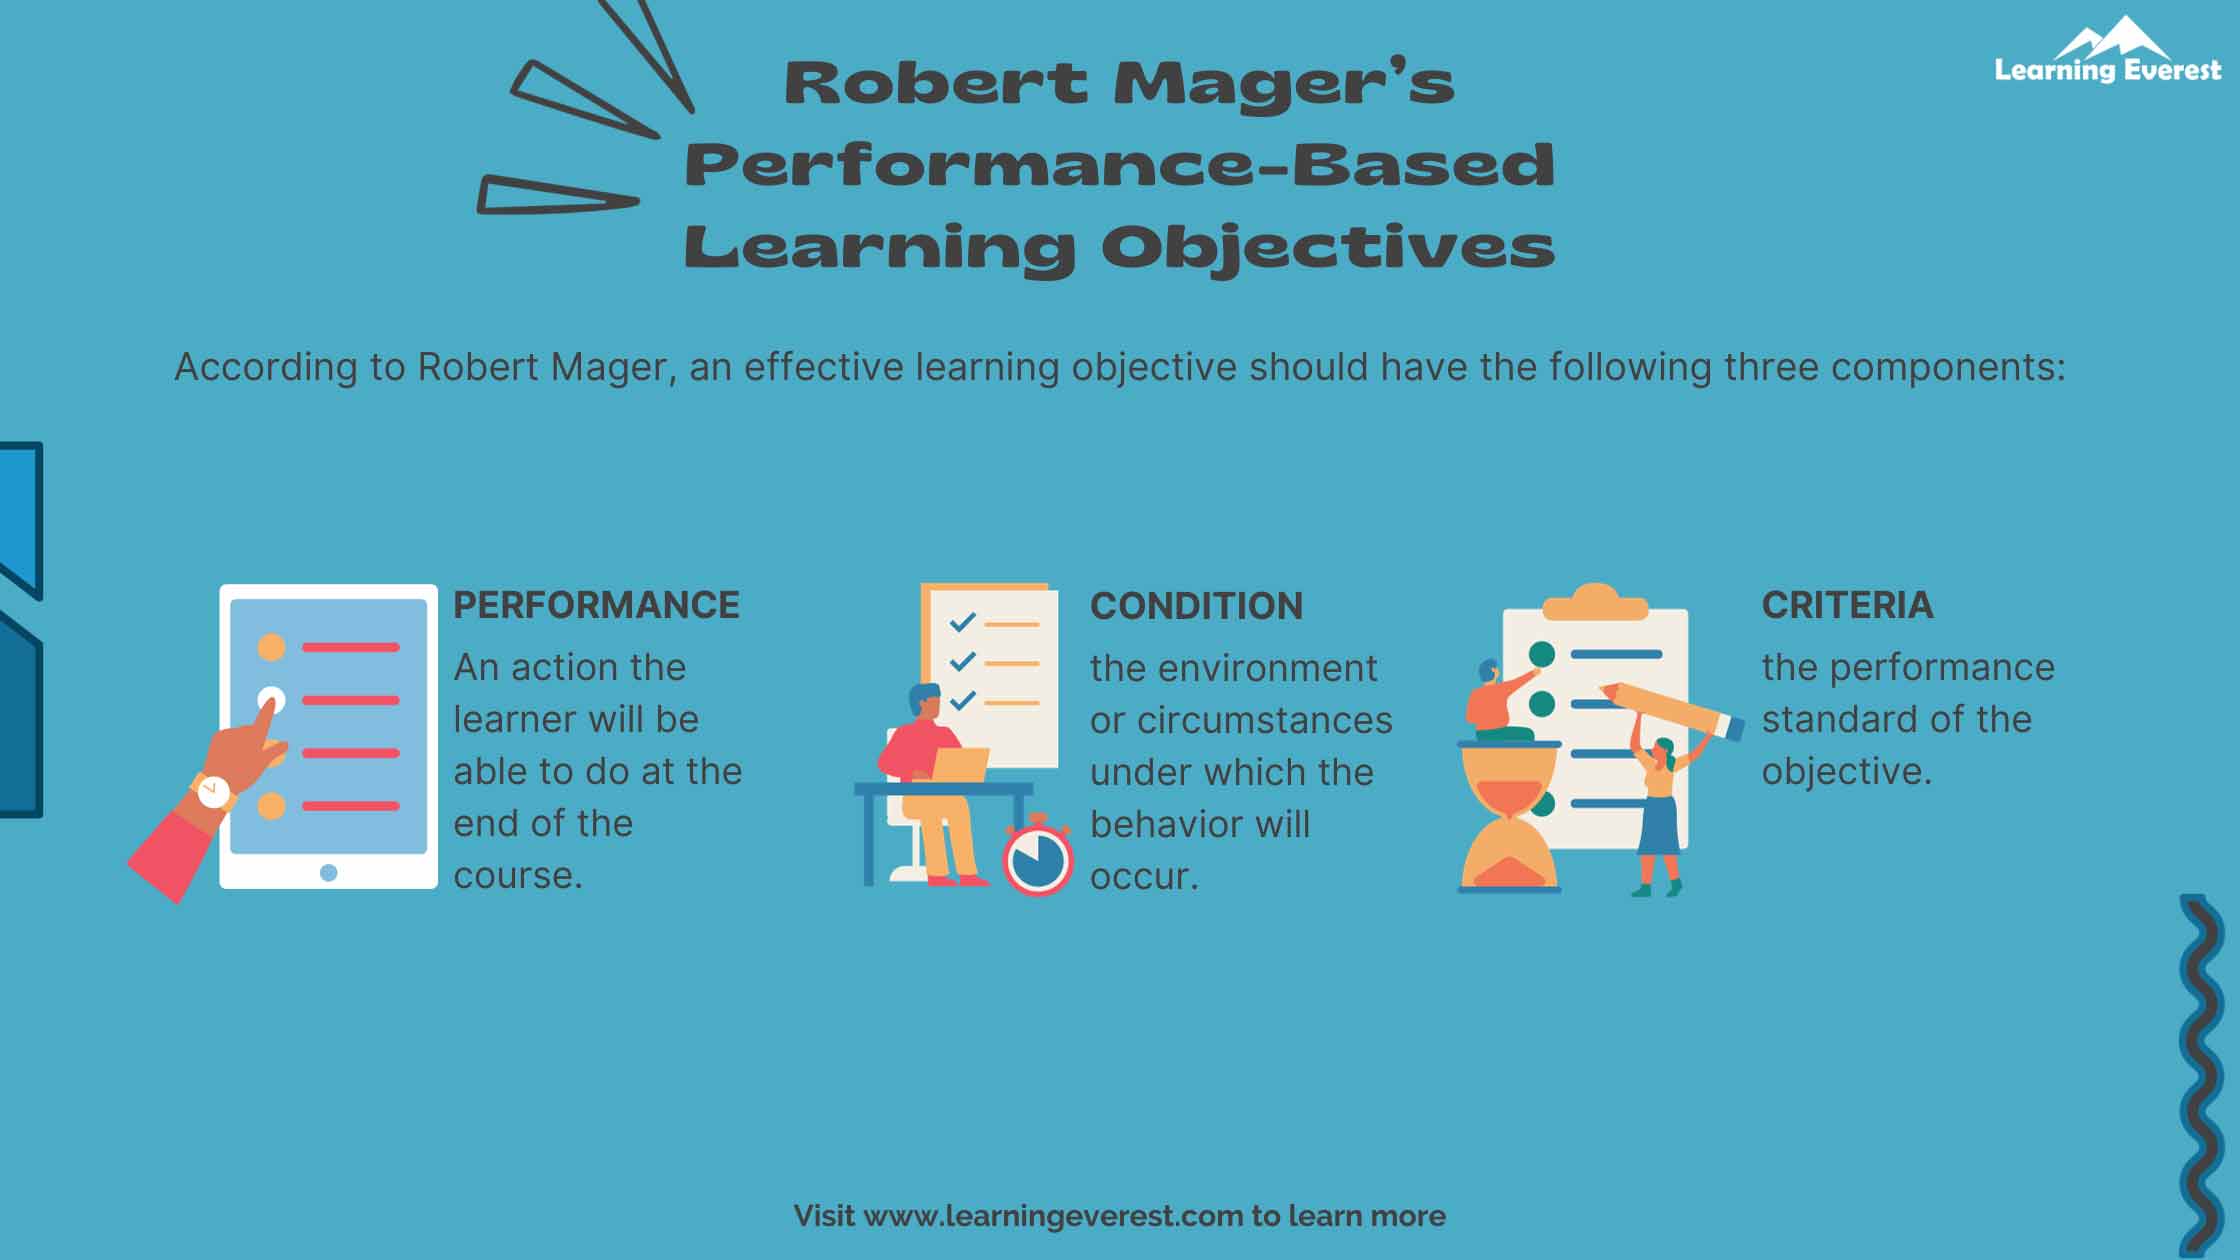 Robert Mager’s Performance-Based Learning Objectives